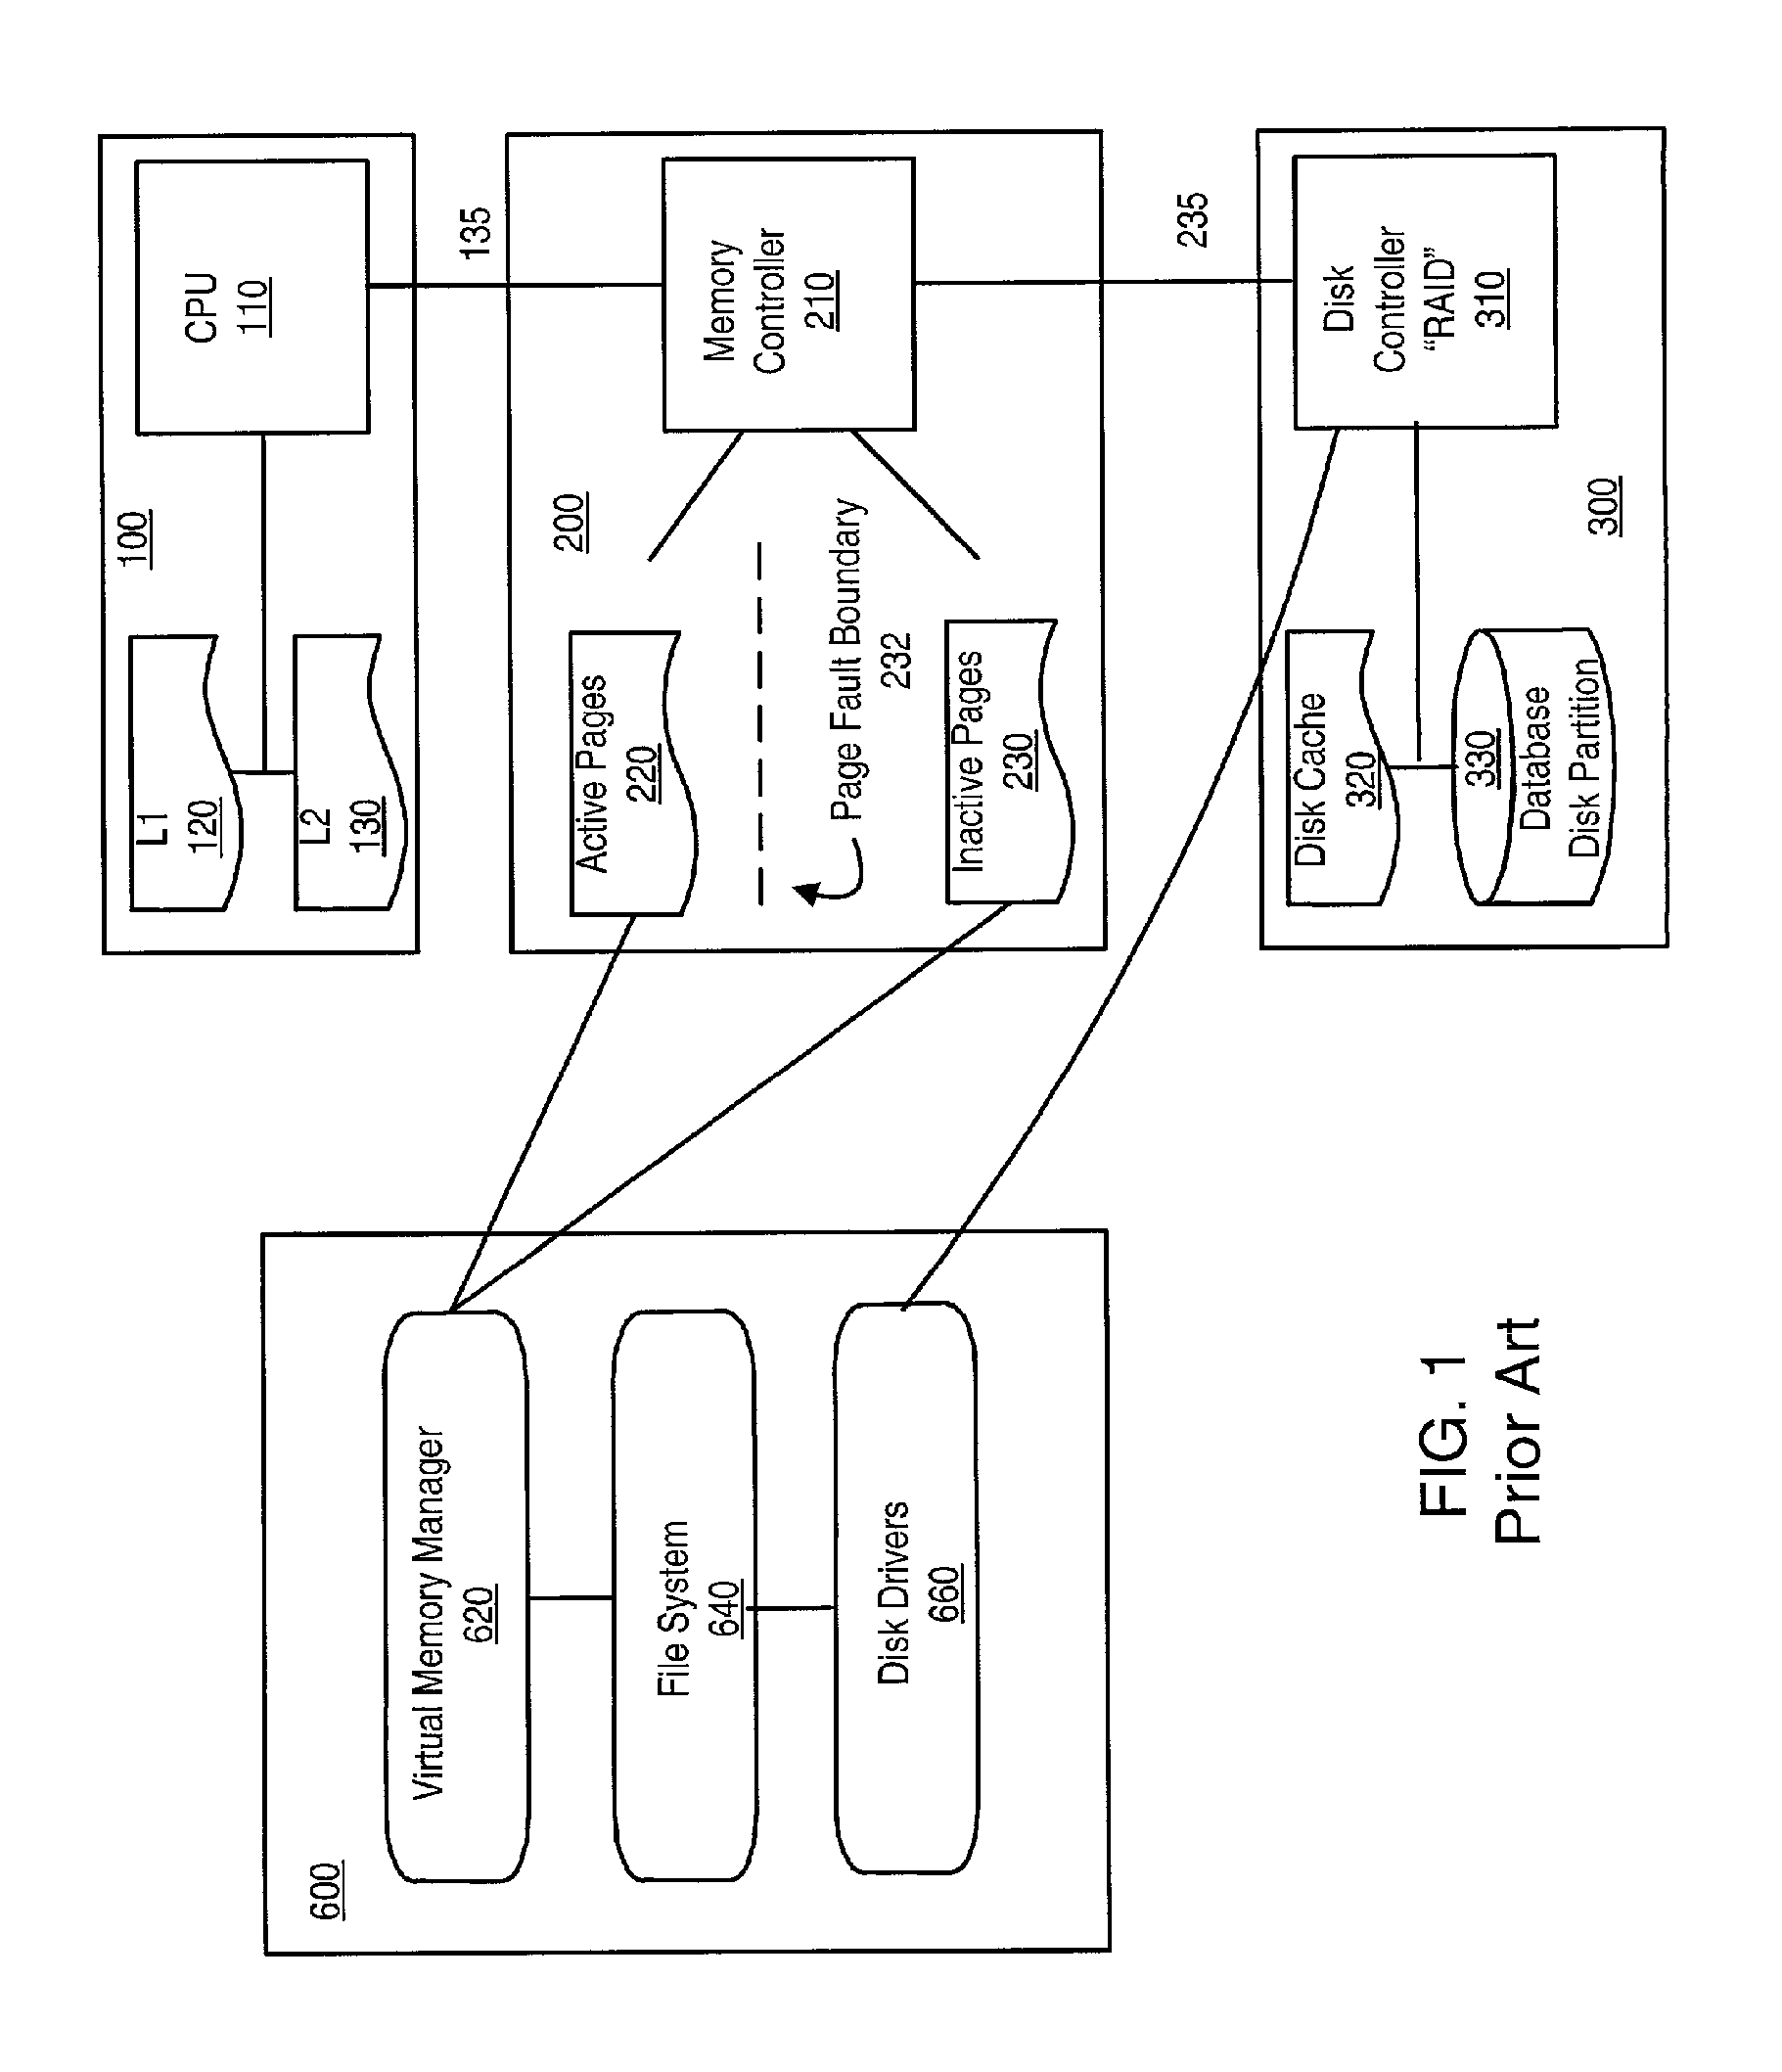 System and method for managing compression and decompression of system memory in a computer system